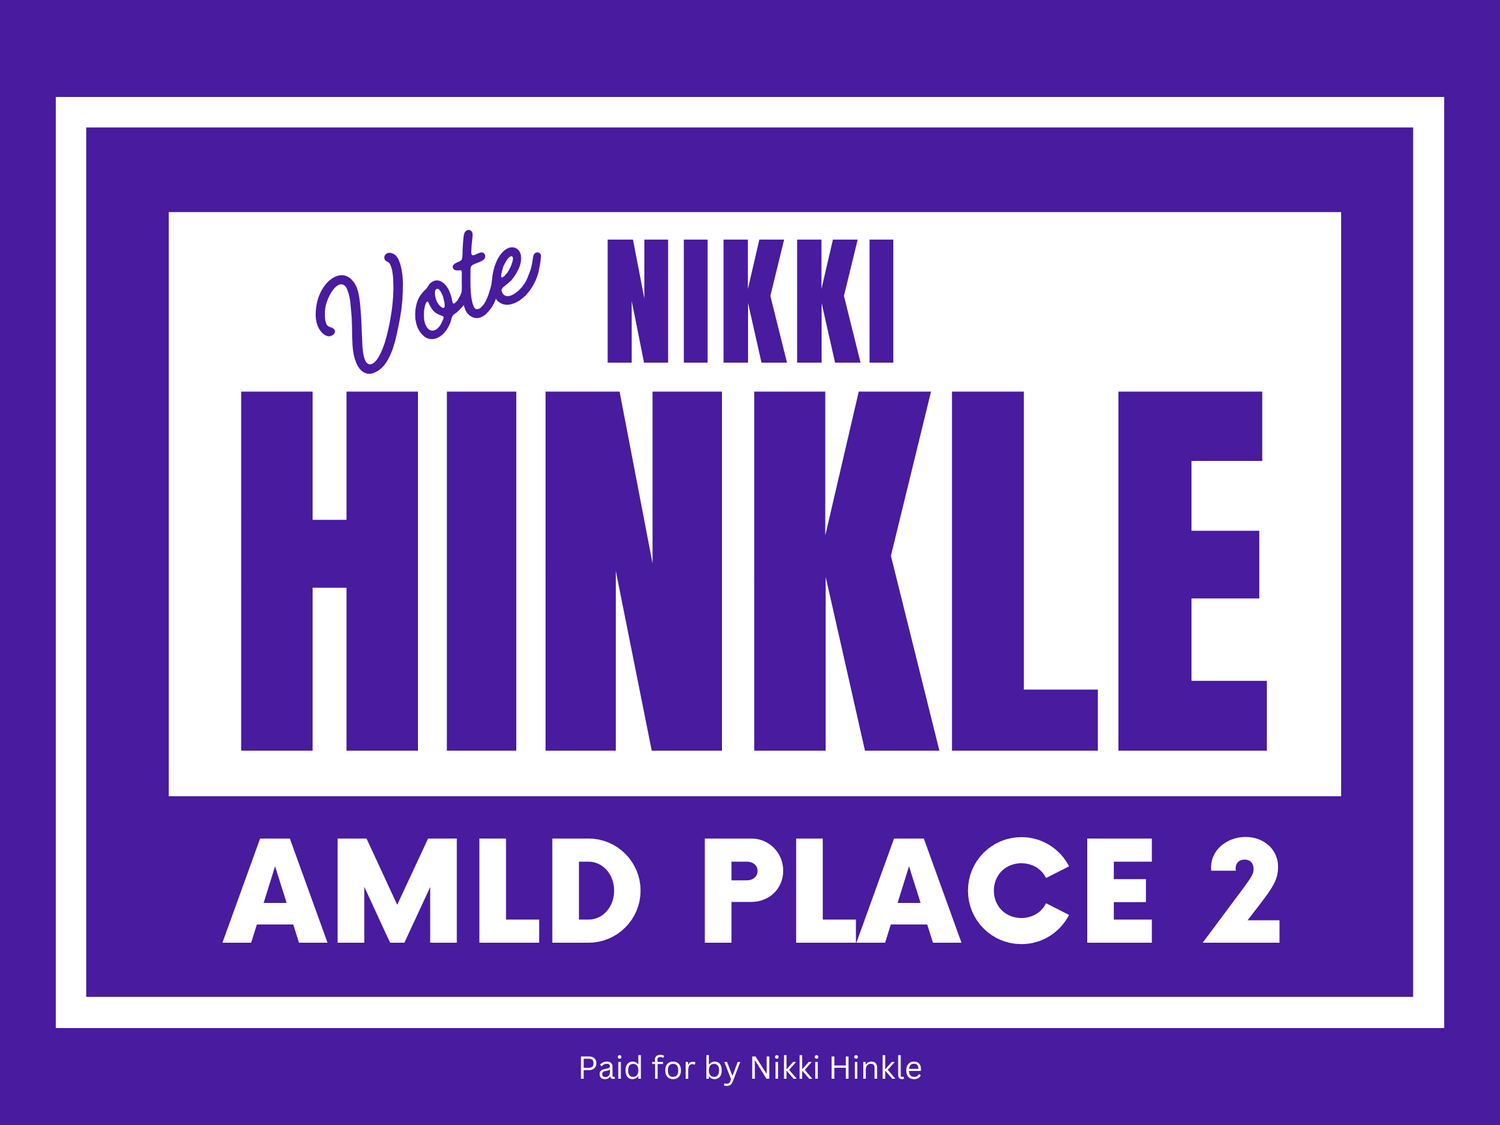 Nikki Hinkle for AMLD Place 2